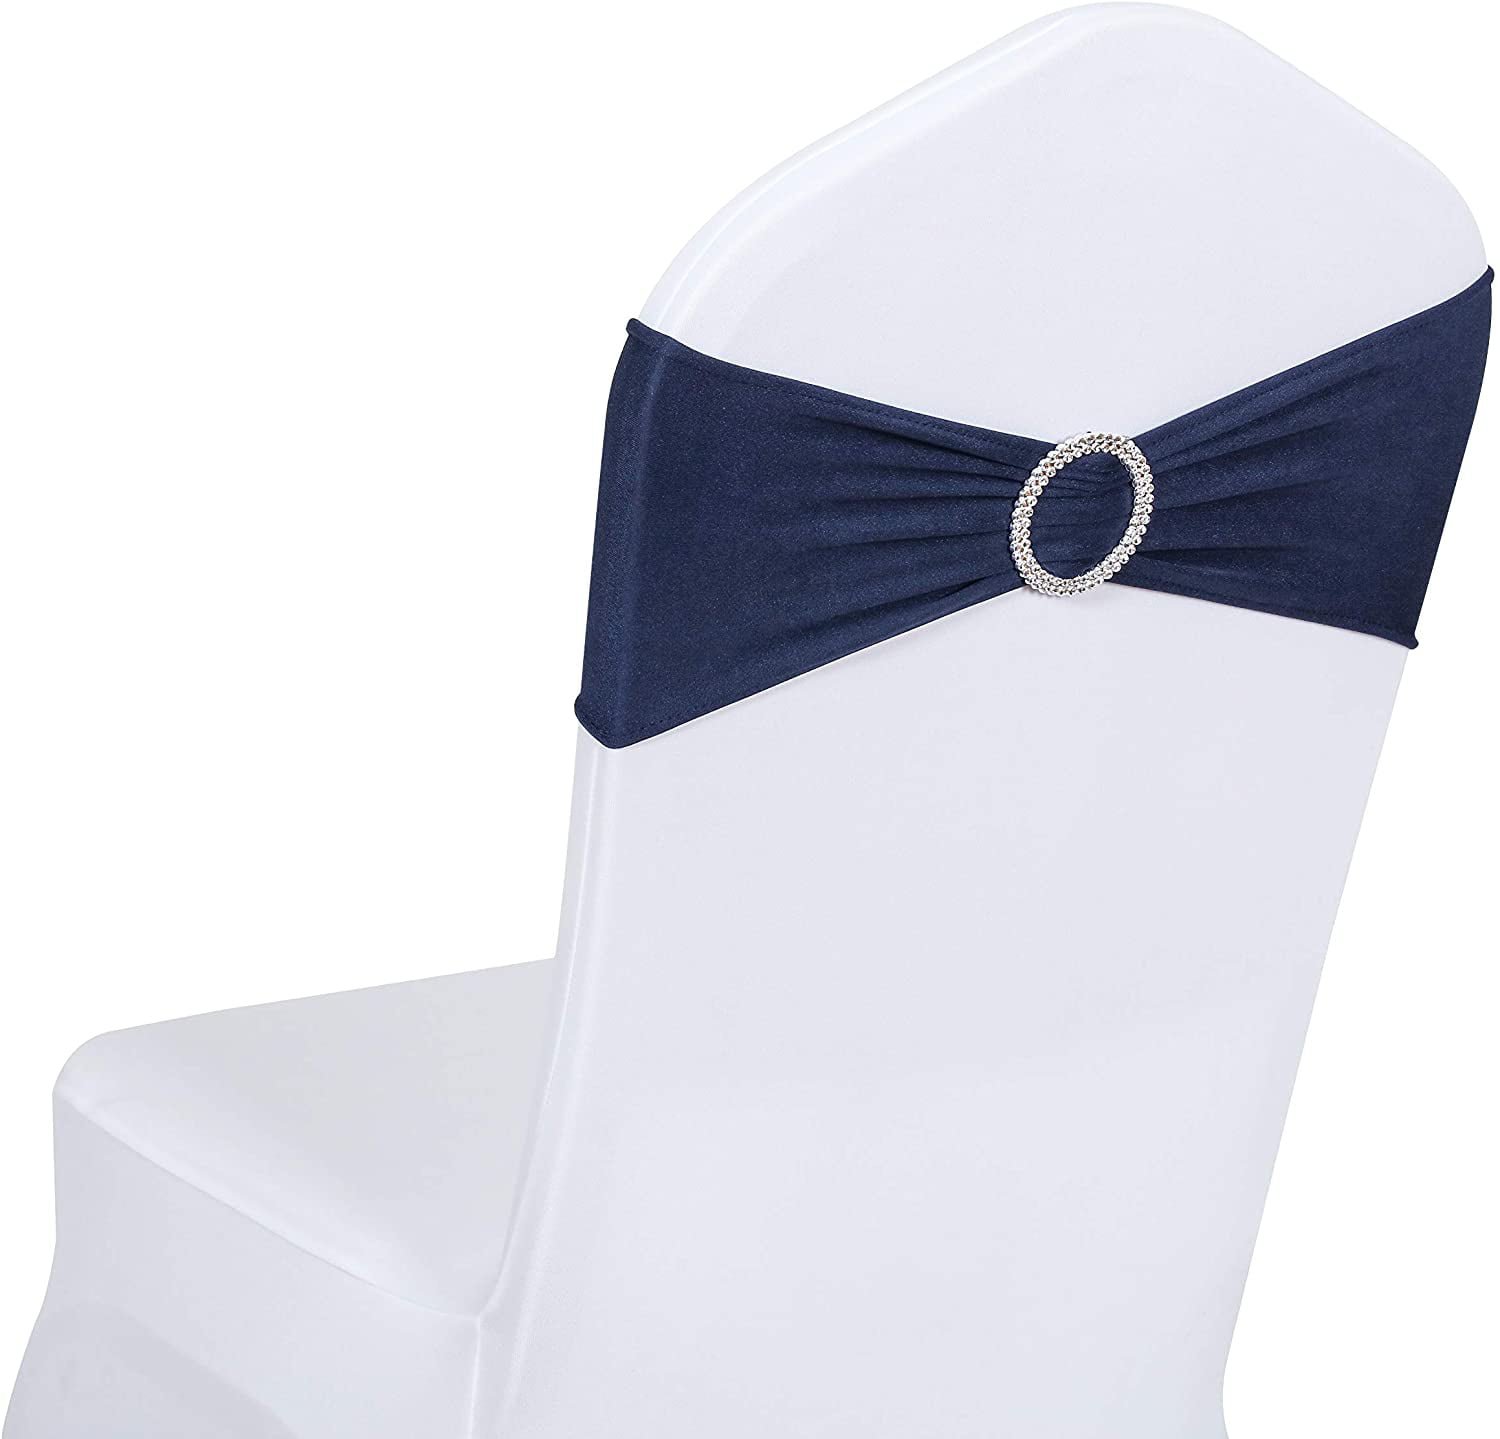 100PCS Spandex Stretch Wedding Party Chair Cover Band Sashes Buckle Bow Slider 